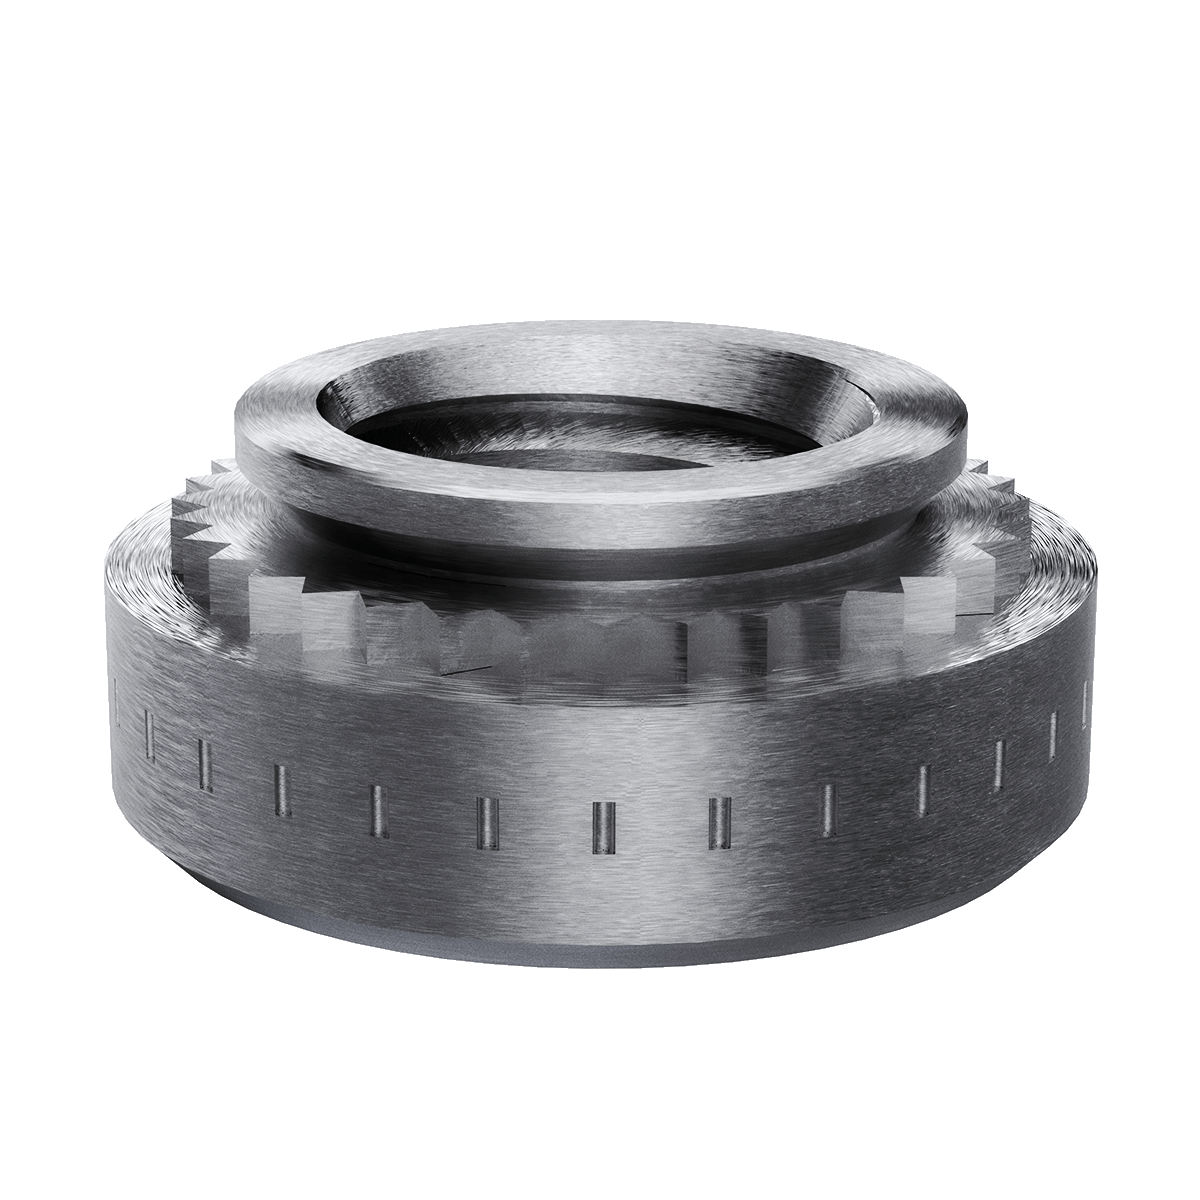 Self-Clinching Nut, For SS, 17-4 Stainless Steel, Passivated, 4-40 x 1, 100 Pack